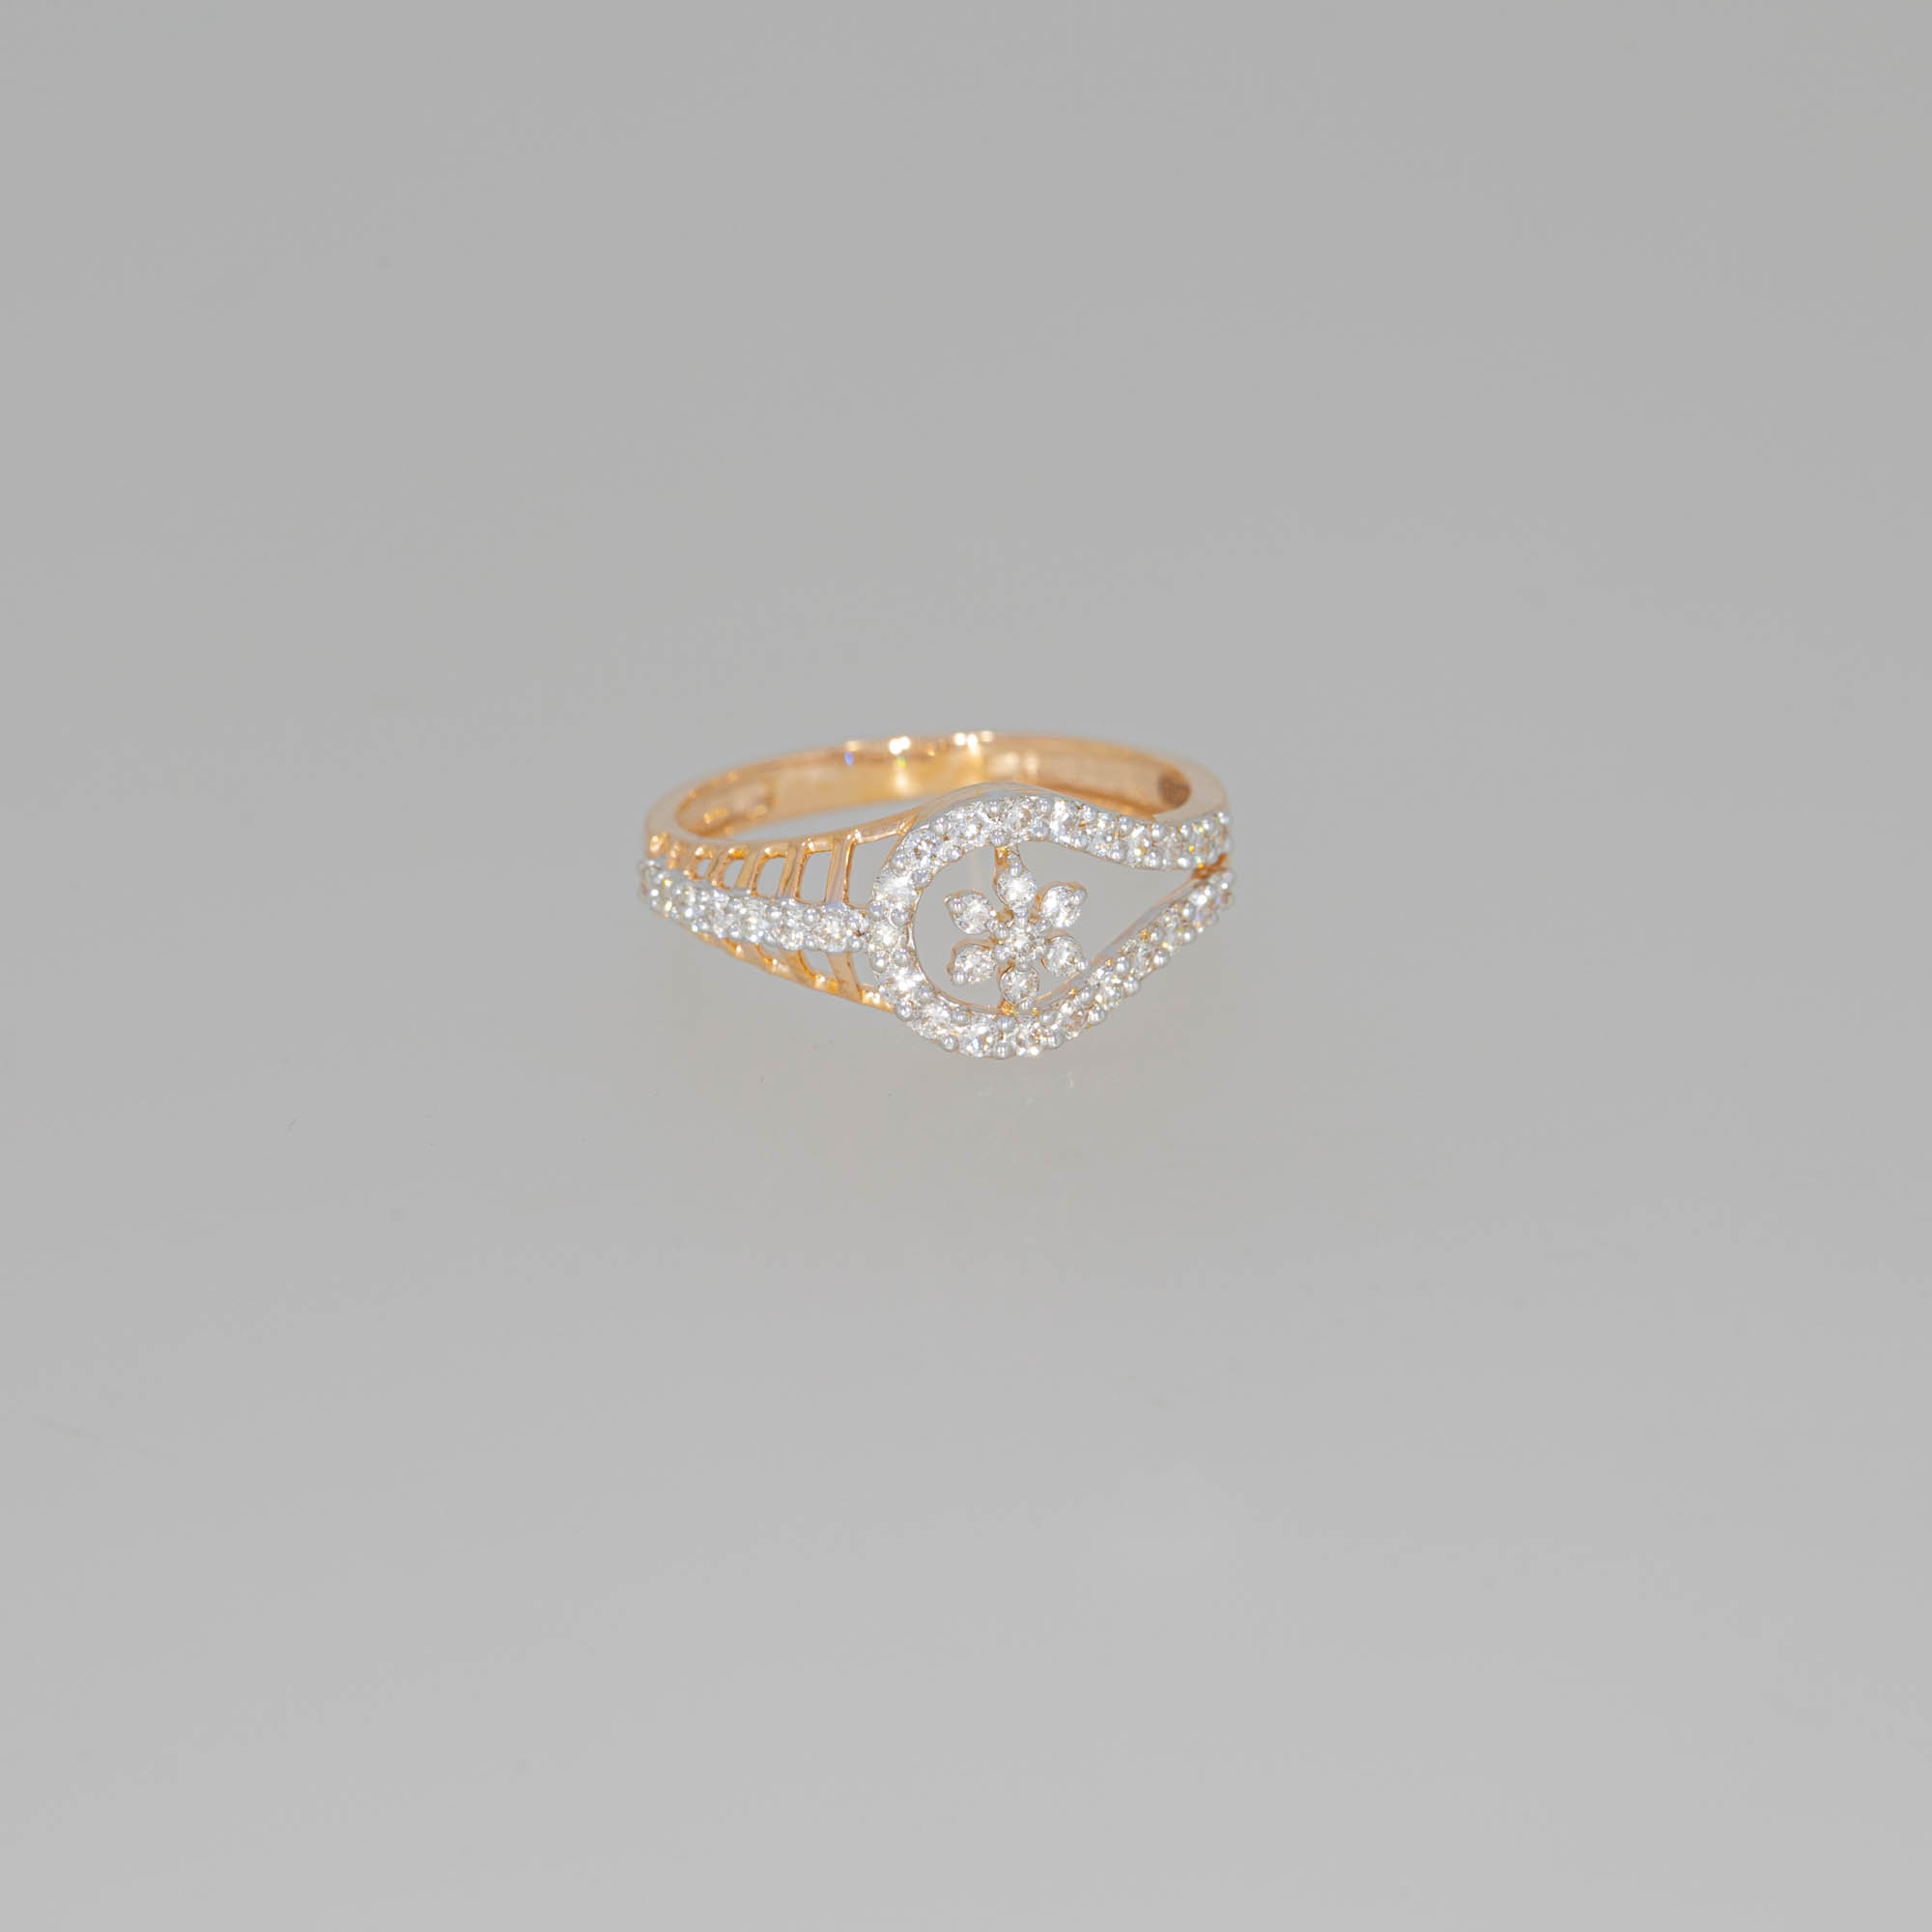 Buy quality Simple Ring with Gold and Diamond Lines in Pune